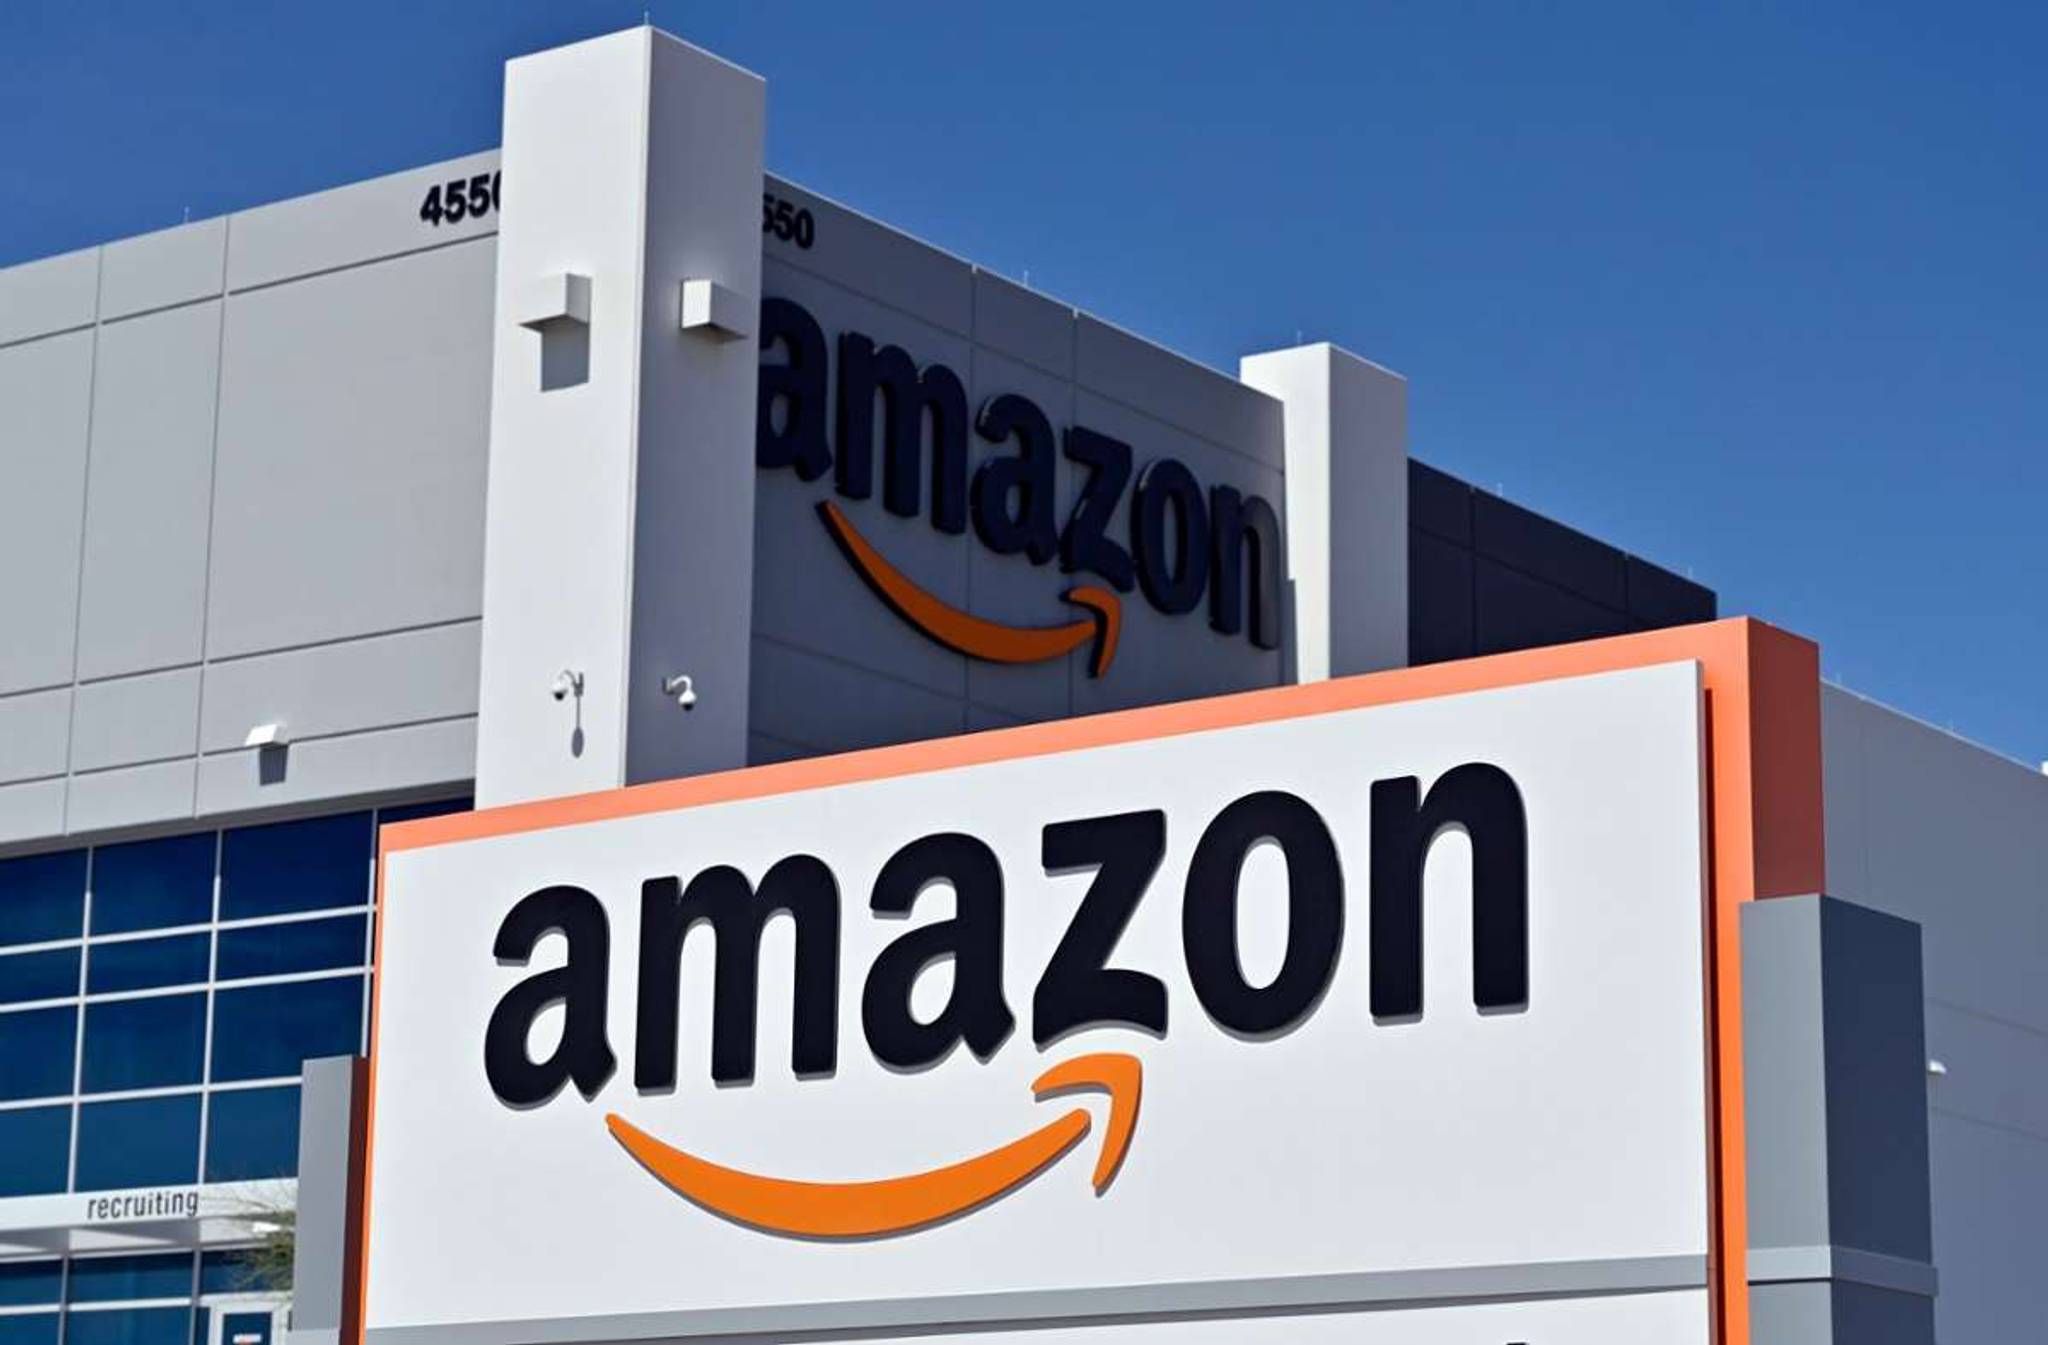 Amazons plans to open stores to woo shoppers